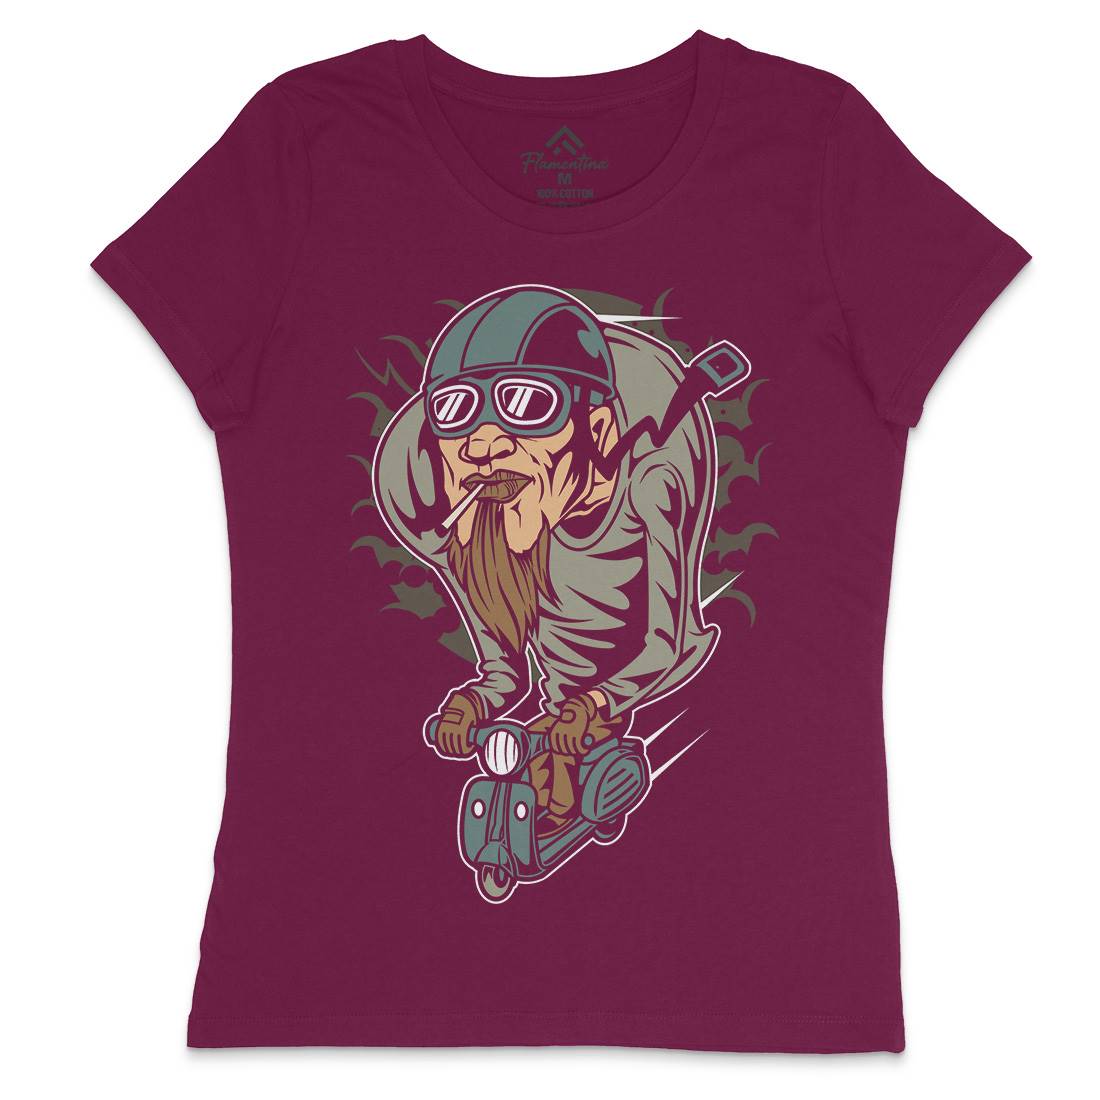 Scooter Man Womens Crew Neck T-Shirt Motorcycles C437